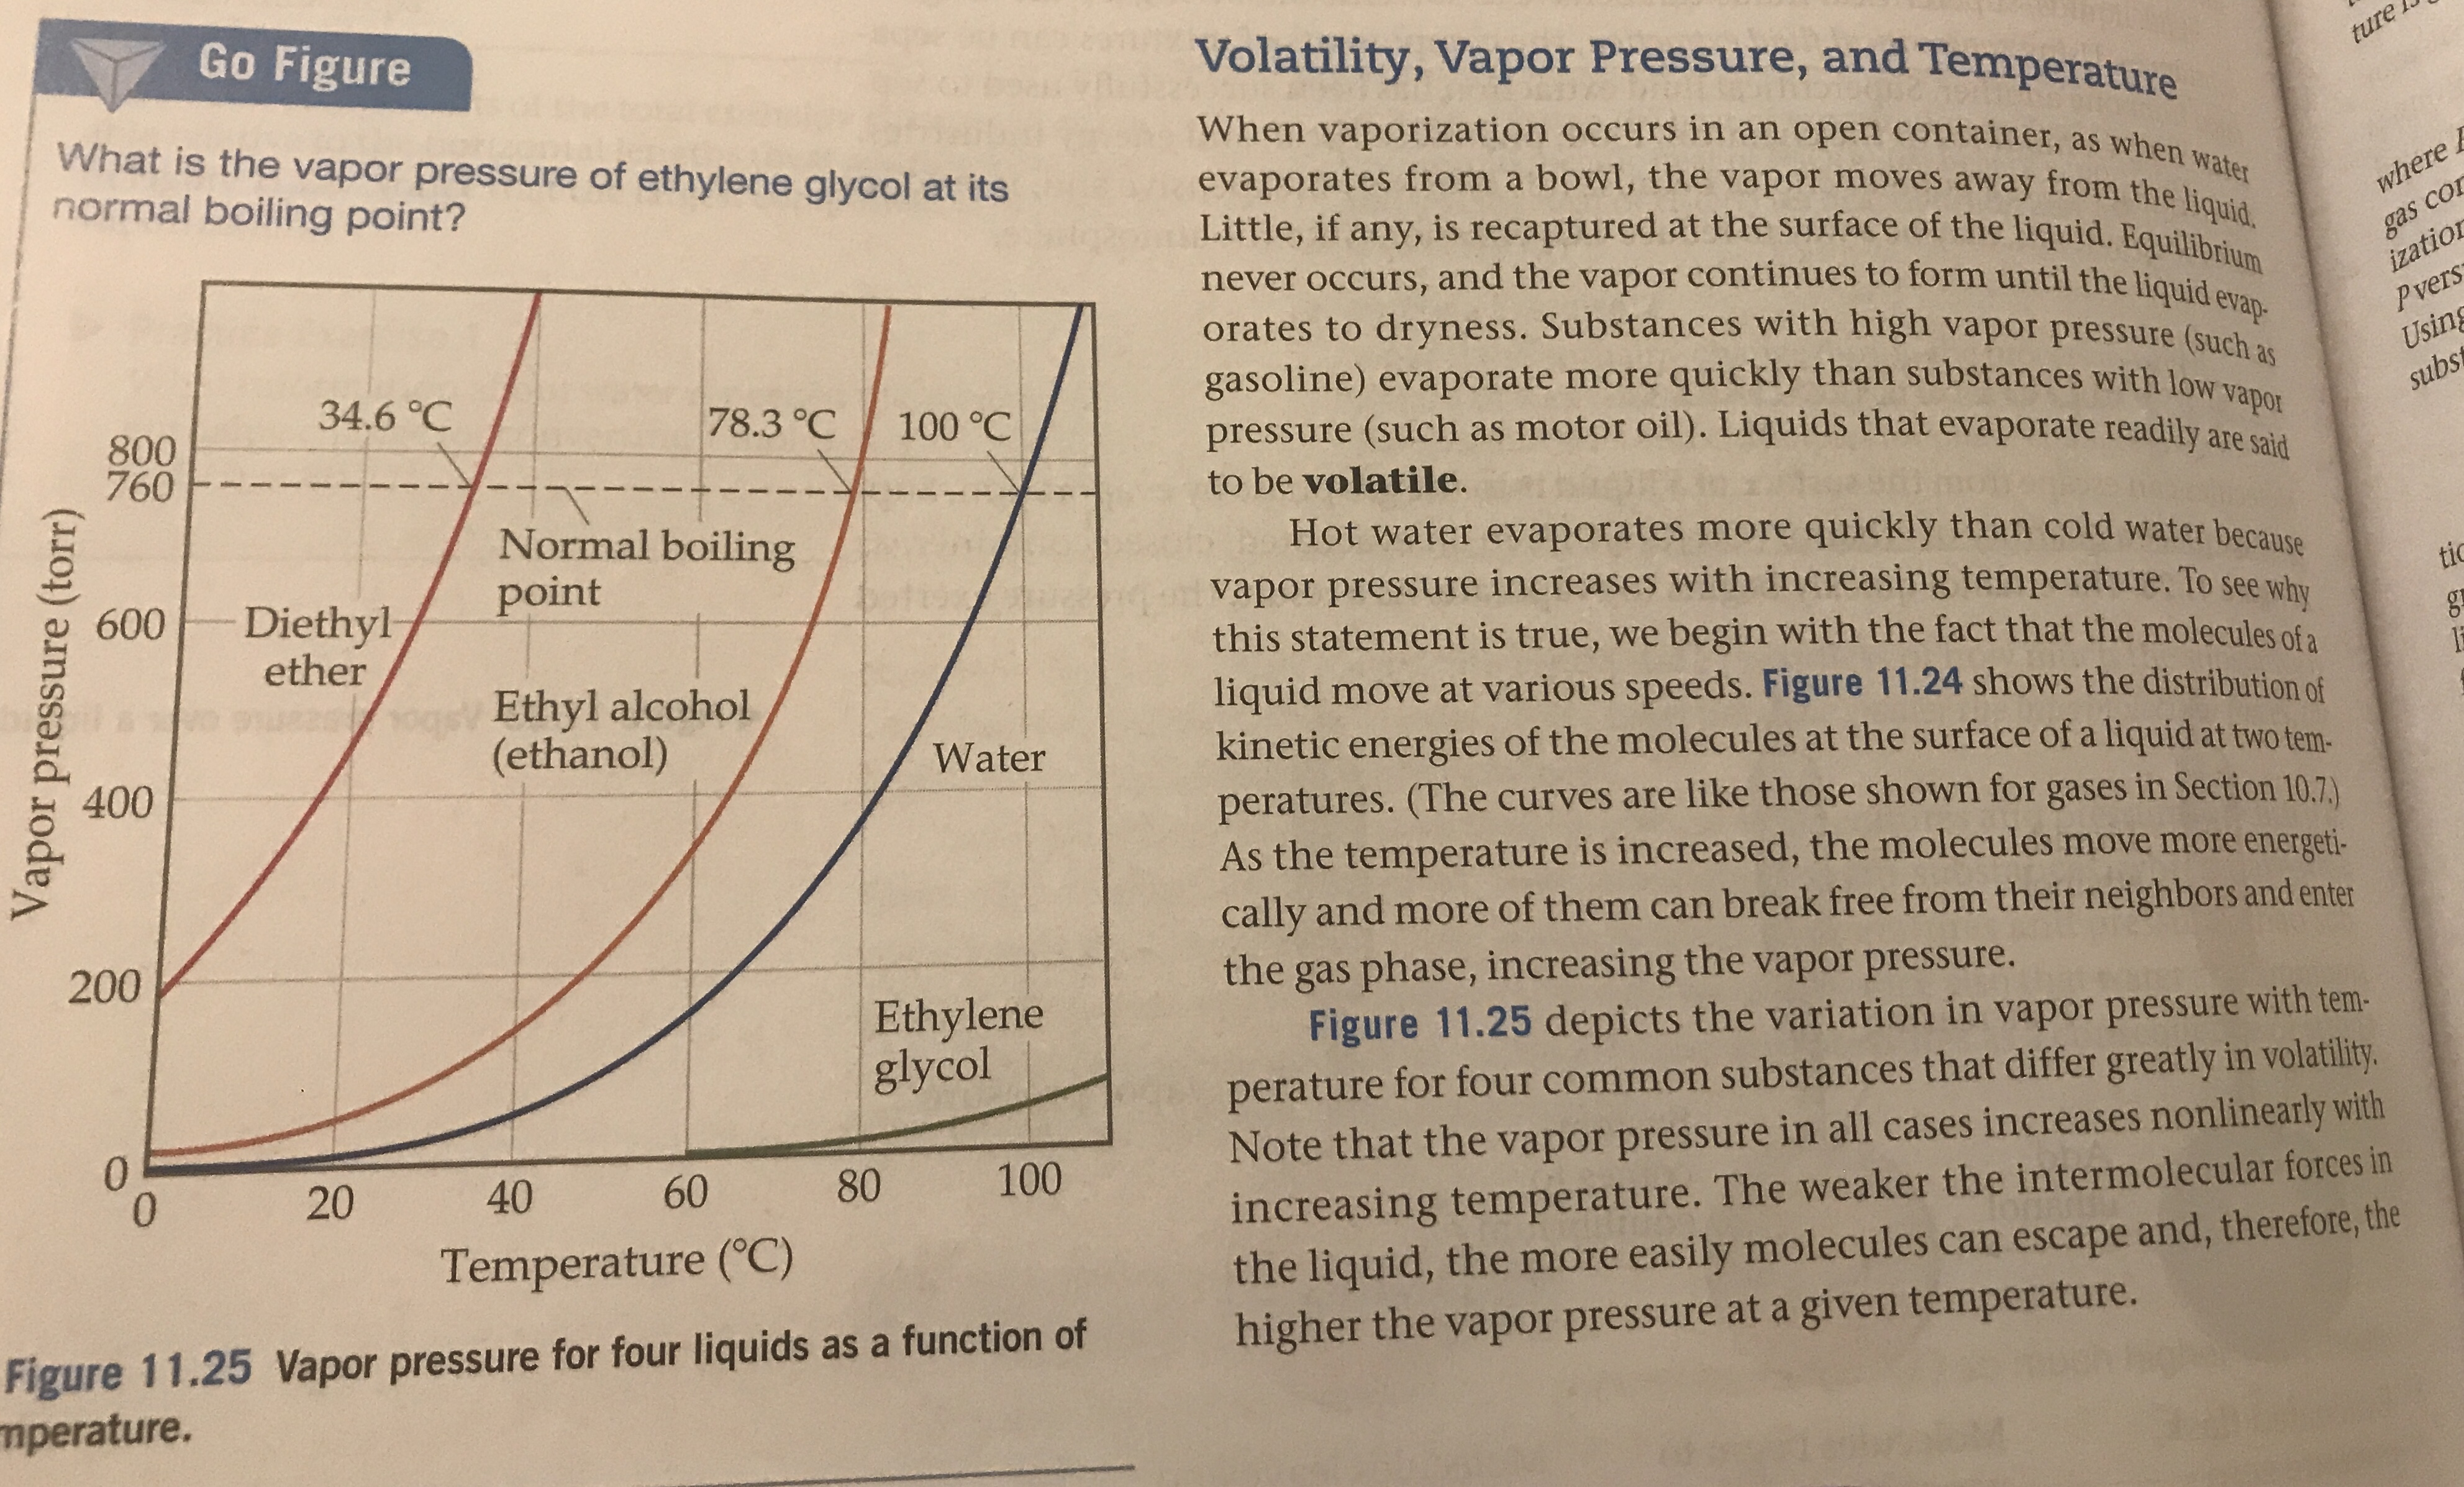 Go Figure
Volatility, Vapor Pressure, and Temperature
When vaporization occurs in an open container, as when water
evaporates from a bowl, the vapor moves away from the liquid.
Little, if any, is recaptured at the surface of the liquid. Equilibrium
What is the vapor pressure of ethylene glycol at its
normal boiling point?
ture
where
COr
never occurs, and the
continues to form until the liquid evap
gas
ization
Pvers
Using
subs
orates to dryness. Substances with high vapor pressure (such as
vapor
gasoline) evaporate more quickly than substances with low vapor
34.6 °C
800
760
78.3 °C
100 °C
pressure (such as motor oil). Liquids that evaporate readily are said
to be volatile.
Normal boiling
point
Hot water evaporates more quickly than cold water because
vapor pressure increases with increasing temperature. To see why
this statement is true, we begin with the fact that the molecules of a
liquid move at various speeds. Figure 11.24 shows the distribution of
kinetic energies of the molecules at the surface of a liquid at two tem-
peratures. (The curves are like those shown for gases in Section 10.7)
As the temperature is increased, the molecules move more energeti-
cally and more of them can break free from their neighbors and enter
the gas phase, increasing the vapor pressure.
Figure 11.25 depicts the variation in vapor pressure with tem-
perature for four common substances that differ greatly in volatility.
Note that the vapor pressure in all cases increases nonlinearly with
increasing temperature. The weaker the intermolecular forces in
the liquid, the more easily molecules can escape and, therefore, the
higher the vapor pressure at a given temperature.
600
Diethyl
ether
tic
Ethyl alcohol
(ethanol)
ga
400
Water
200
Ethylene
glycol
0
0
20
40
60
80
100
Temperature (C)
Figure 11.25 Vapor pressure for four liquids as a function of
mperature.
I
I
Vapor pressure (torr)
